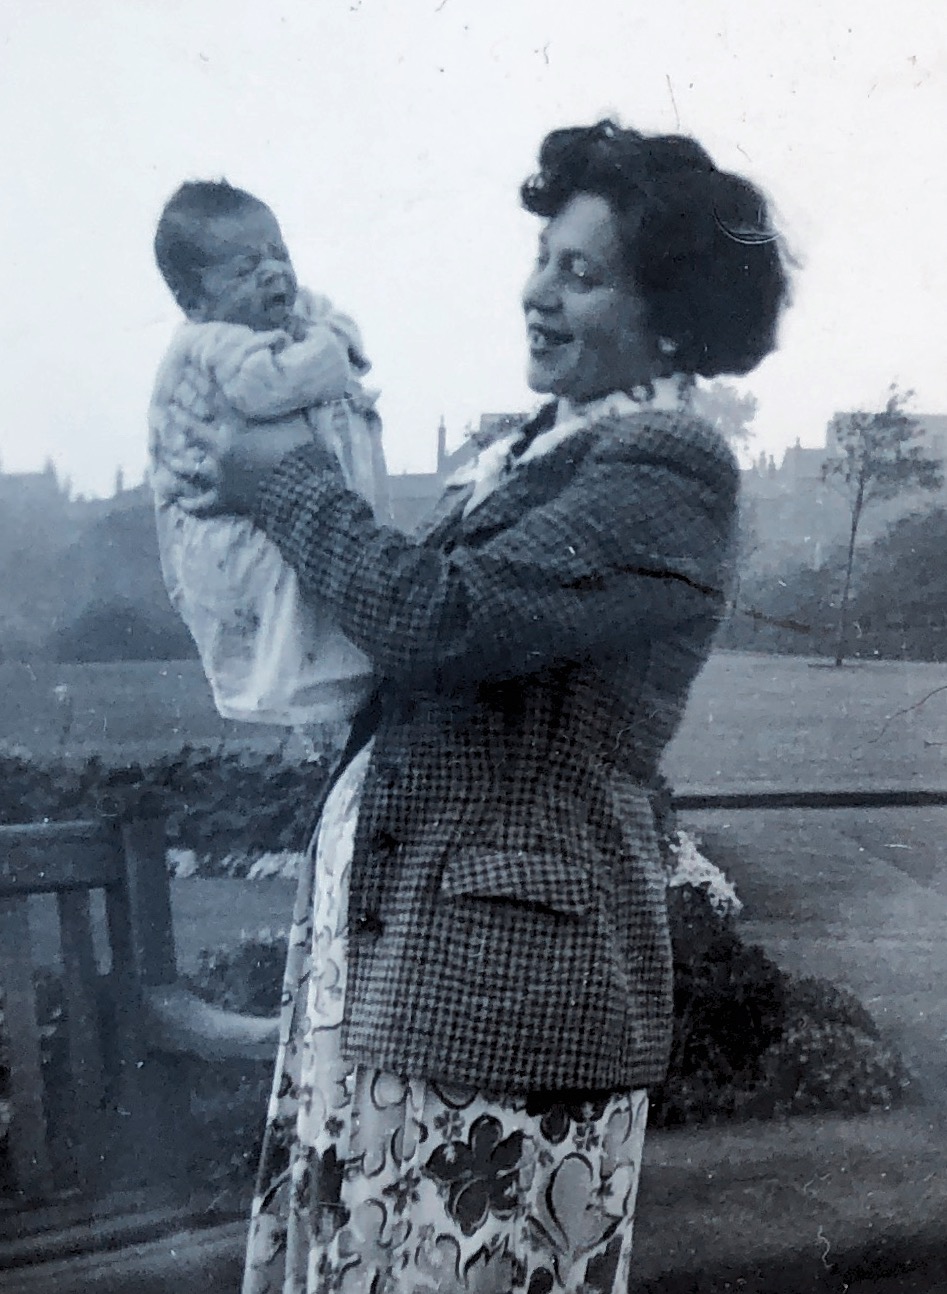 My mother, Carmen Cassar SACCO, holding me, Stephen John Charles Sacco, circa September 1952. Mum would have been soon to celebrate or just celebrated her 17th Birthday.